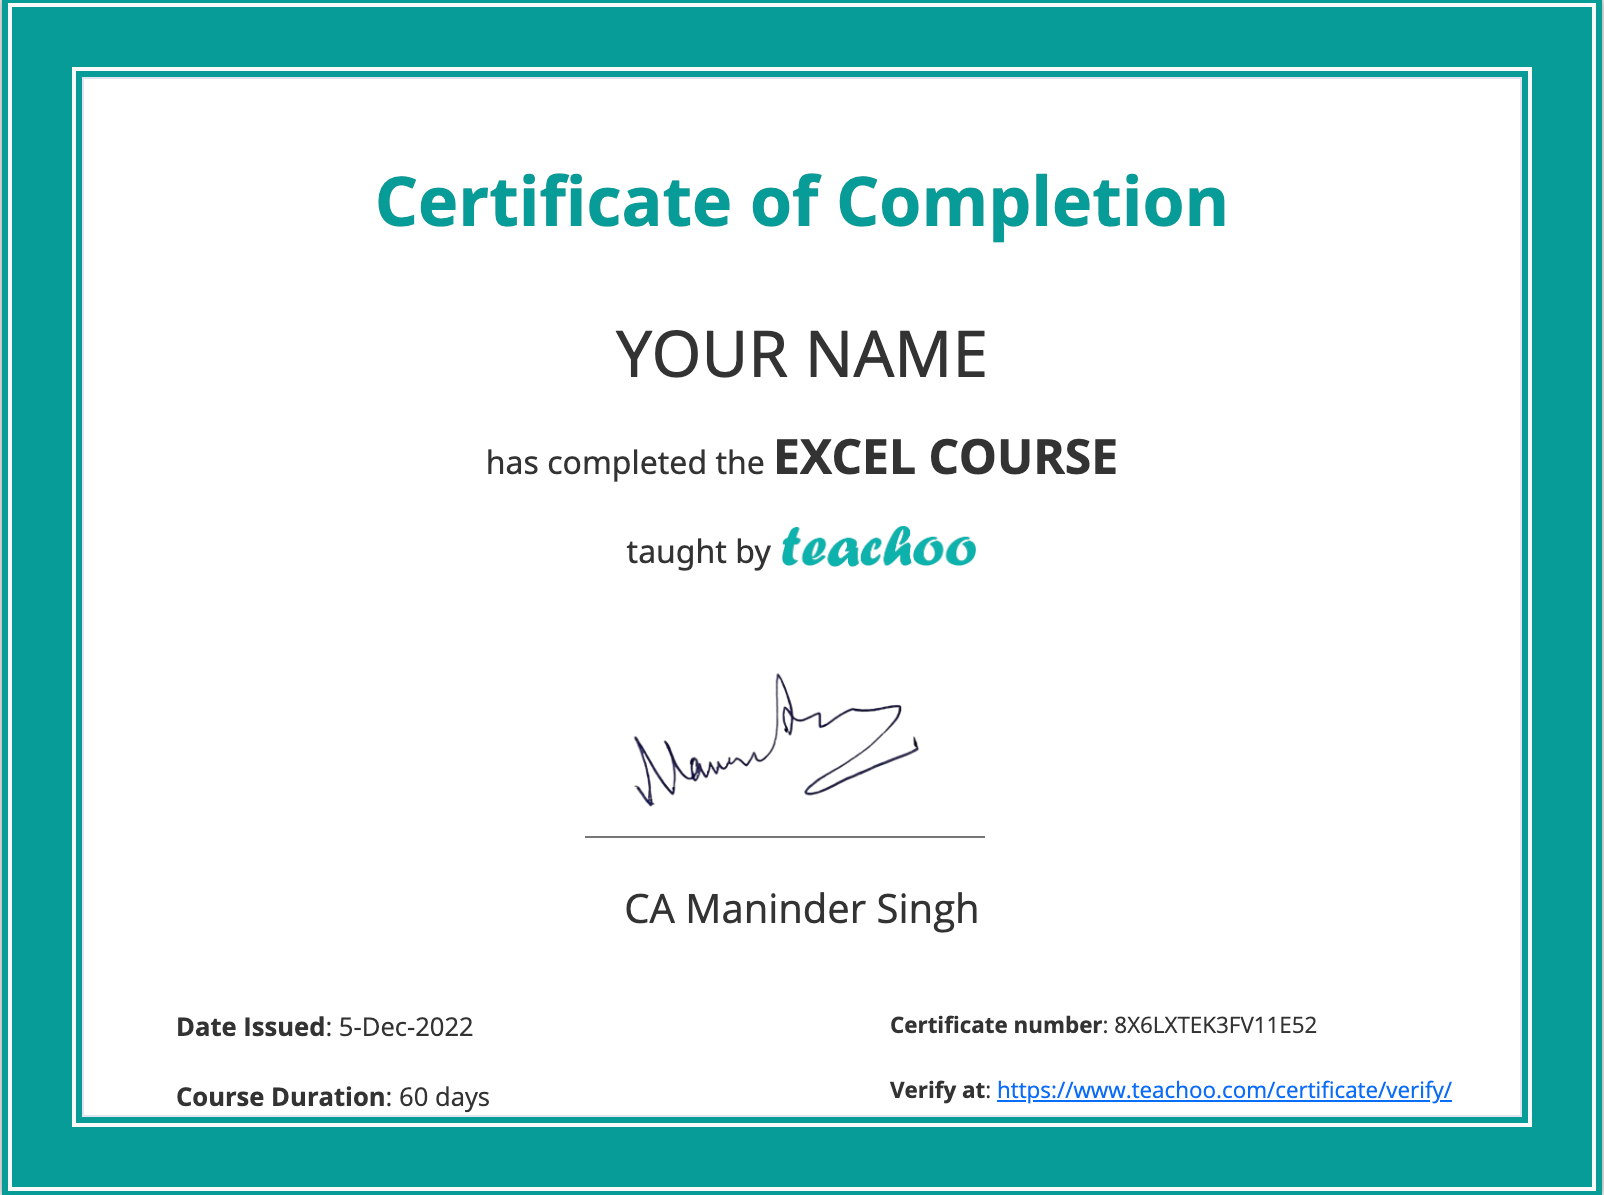 Certificate after doing the Excel Course on Teachoo